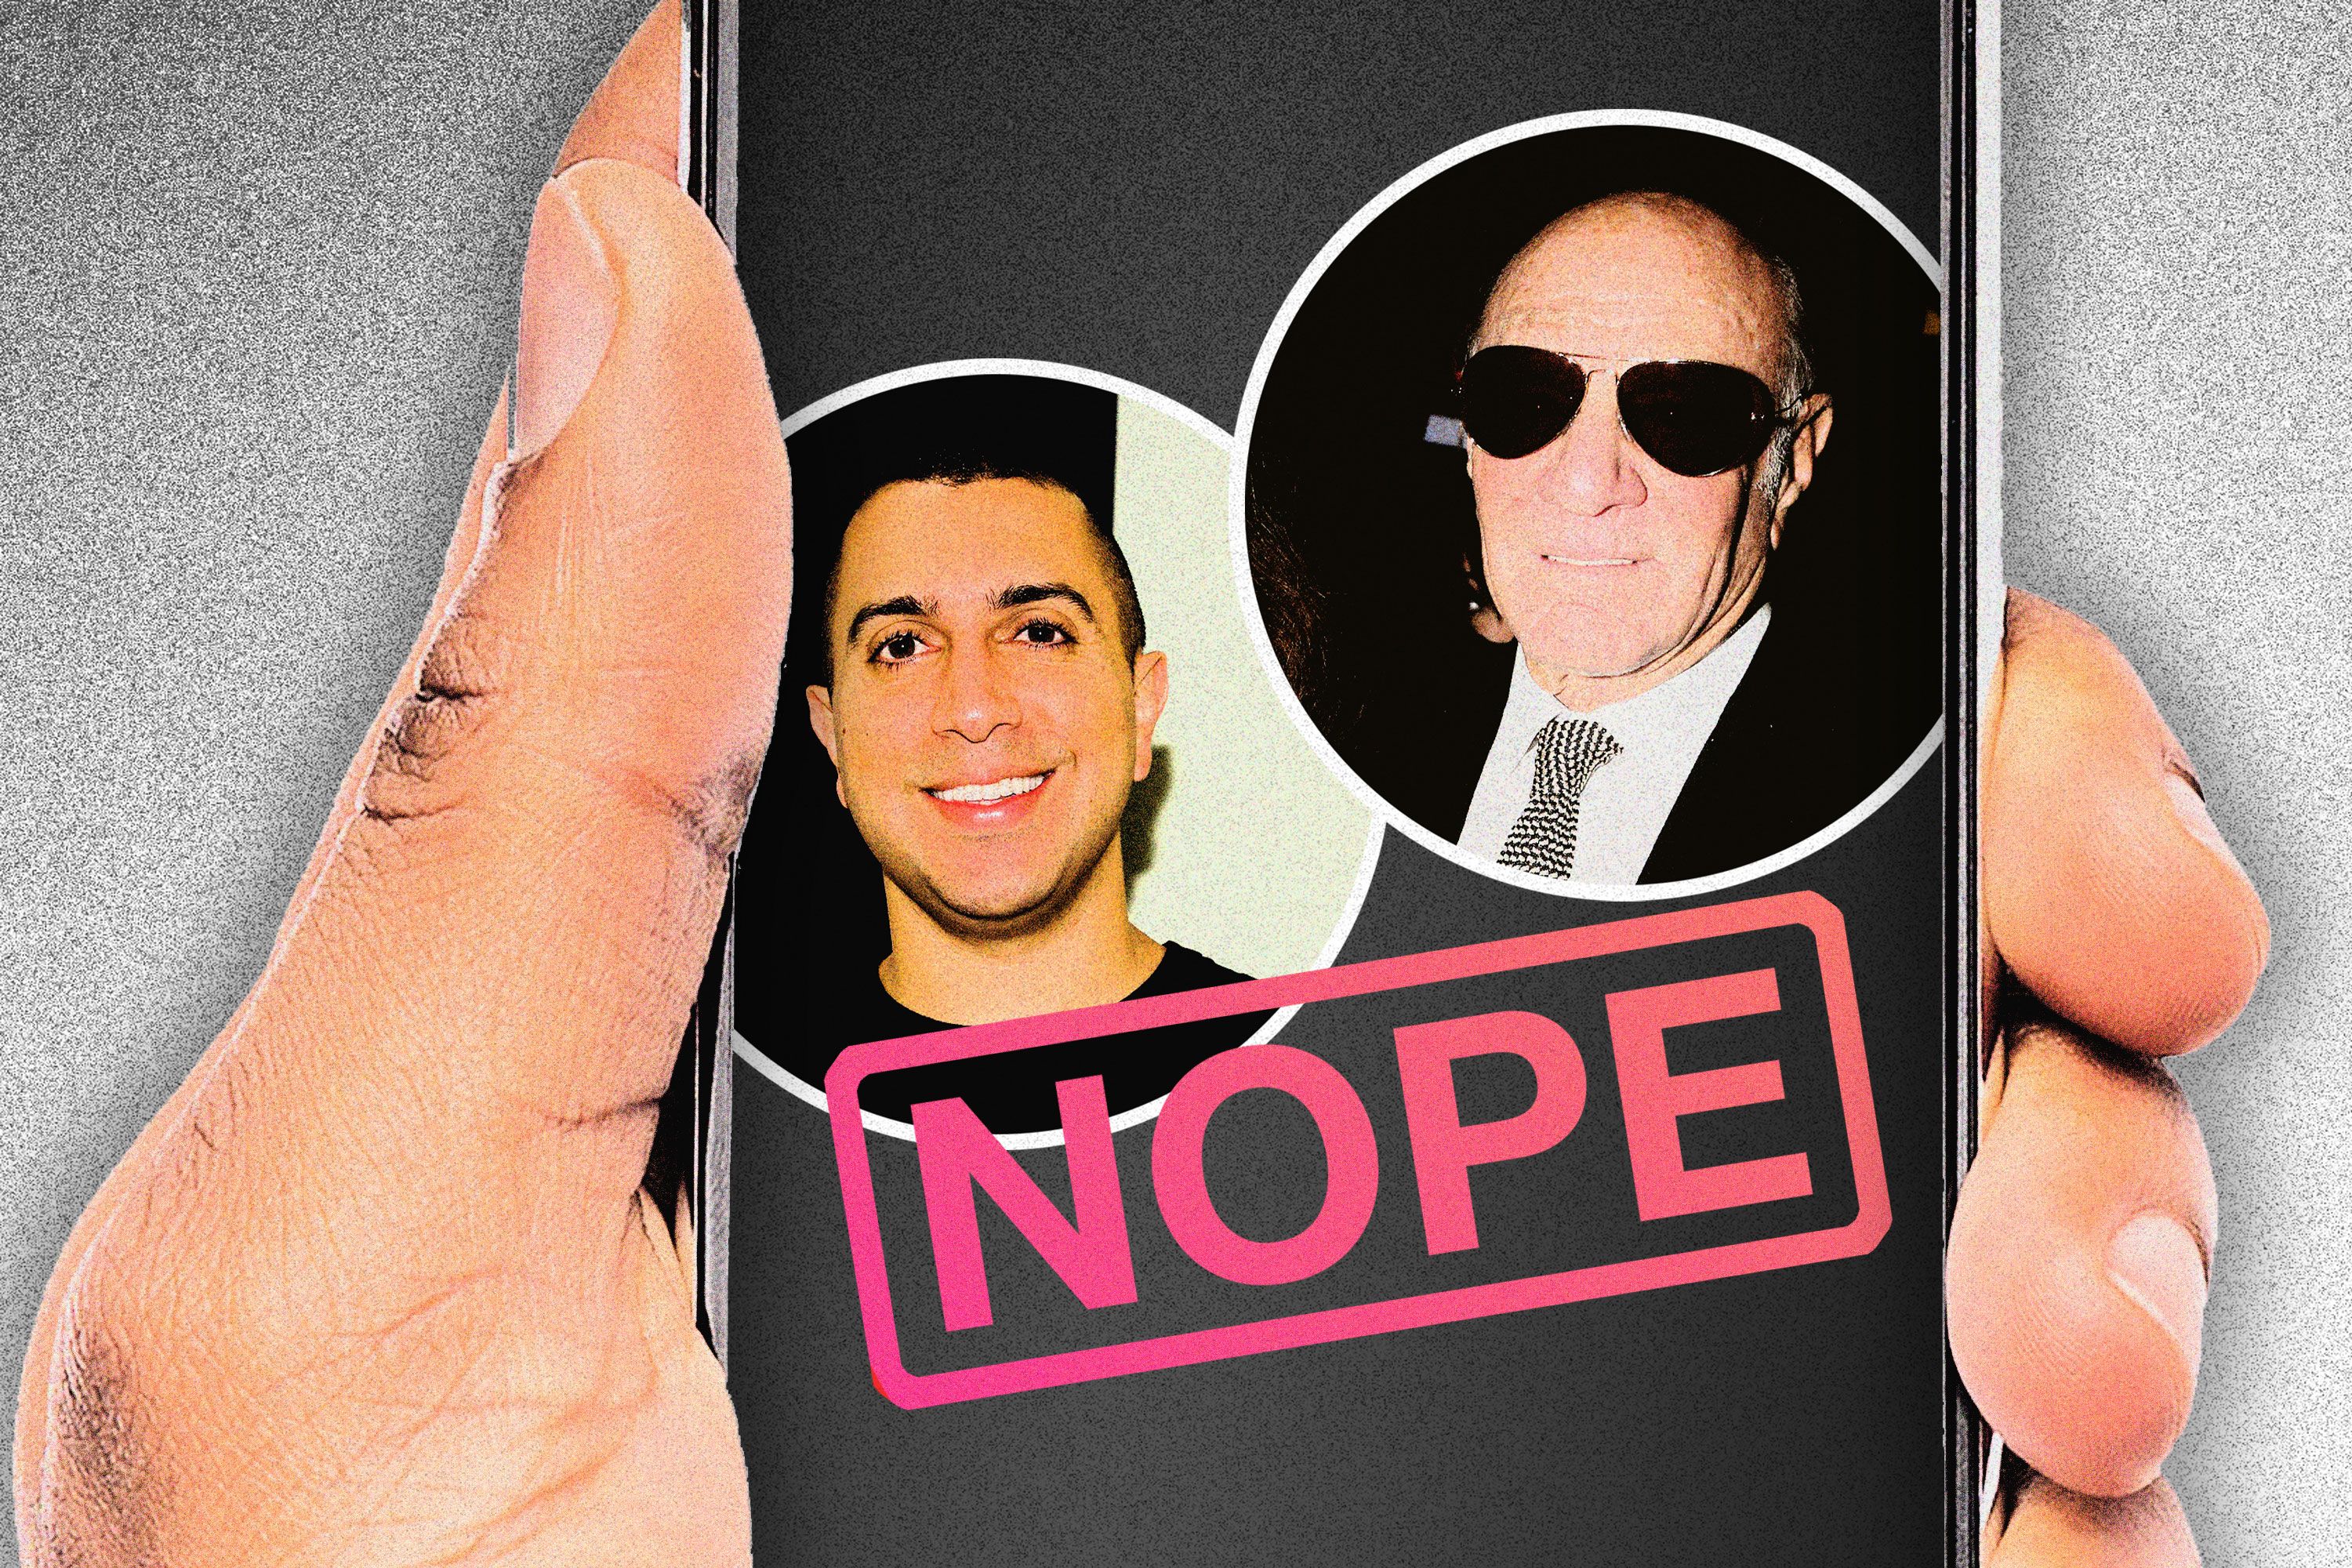 The Tinder Revenge Story Between Sean Rad and Barry Diller image